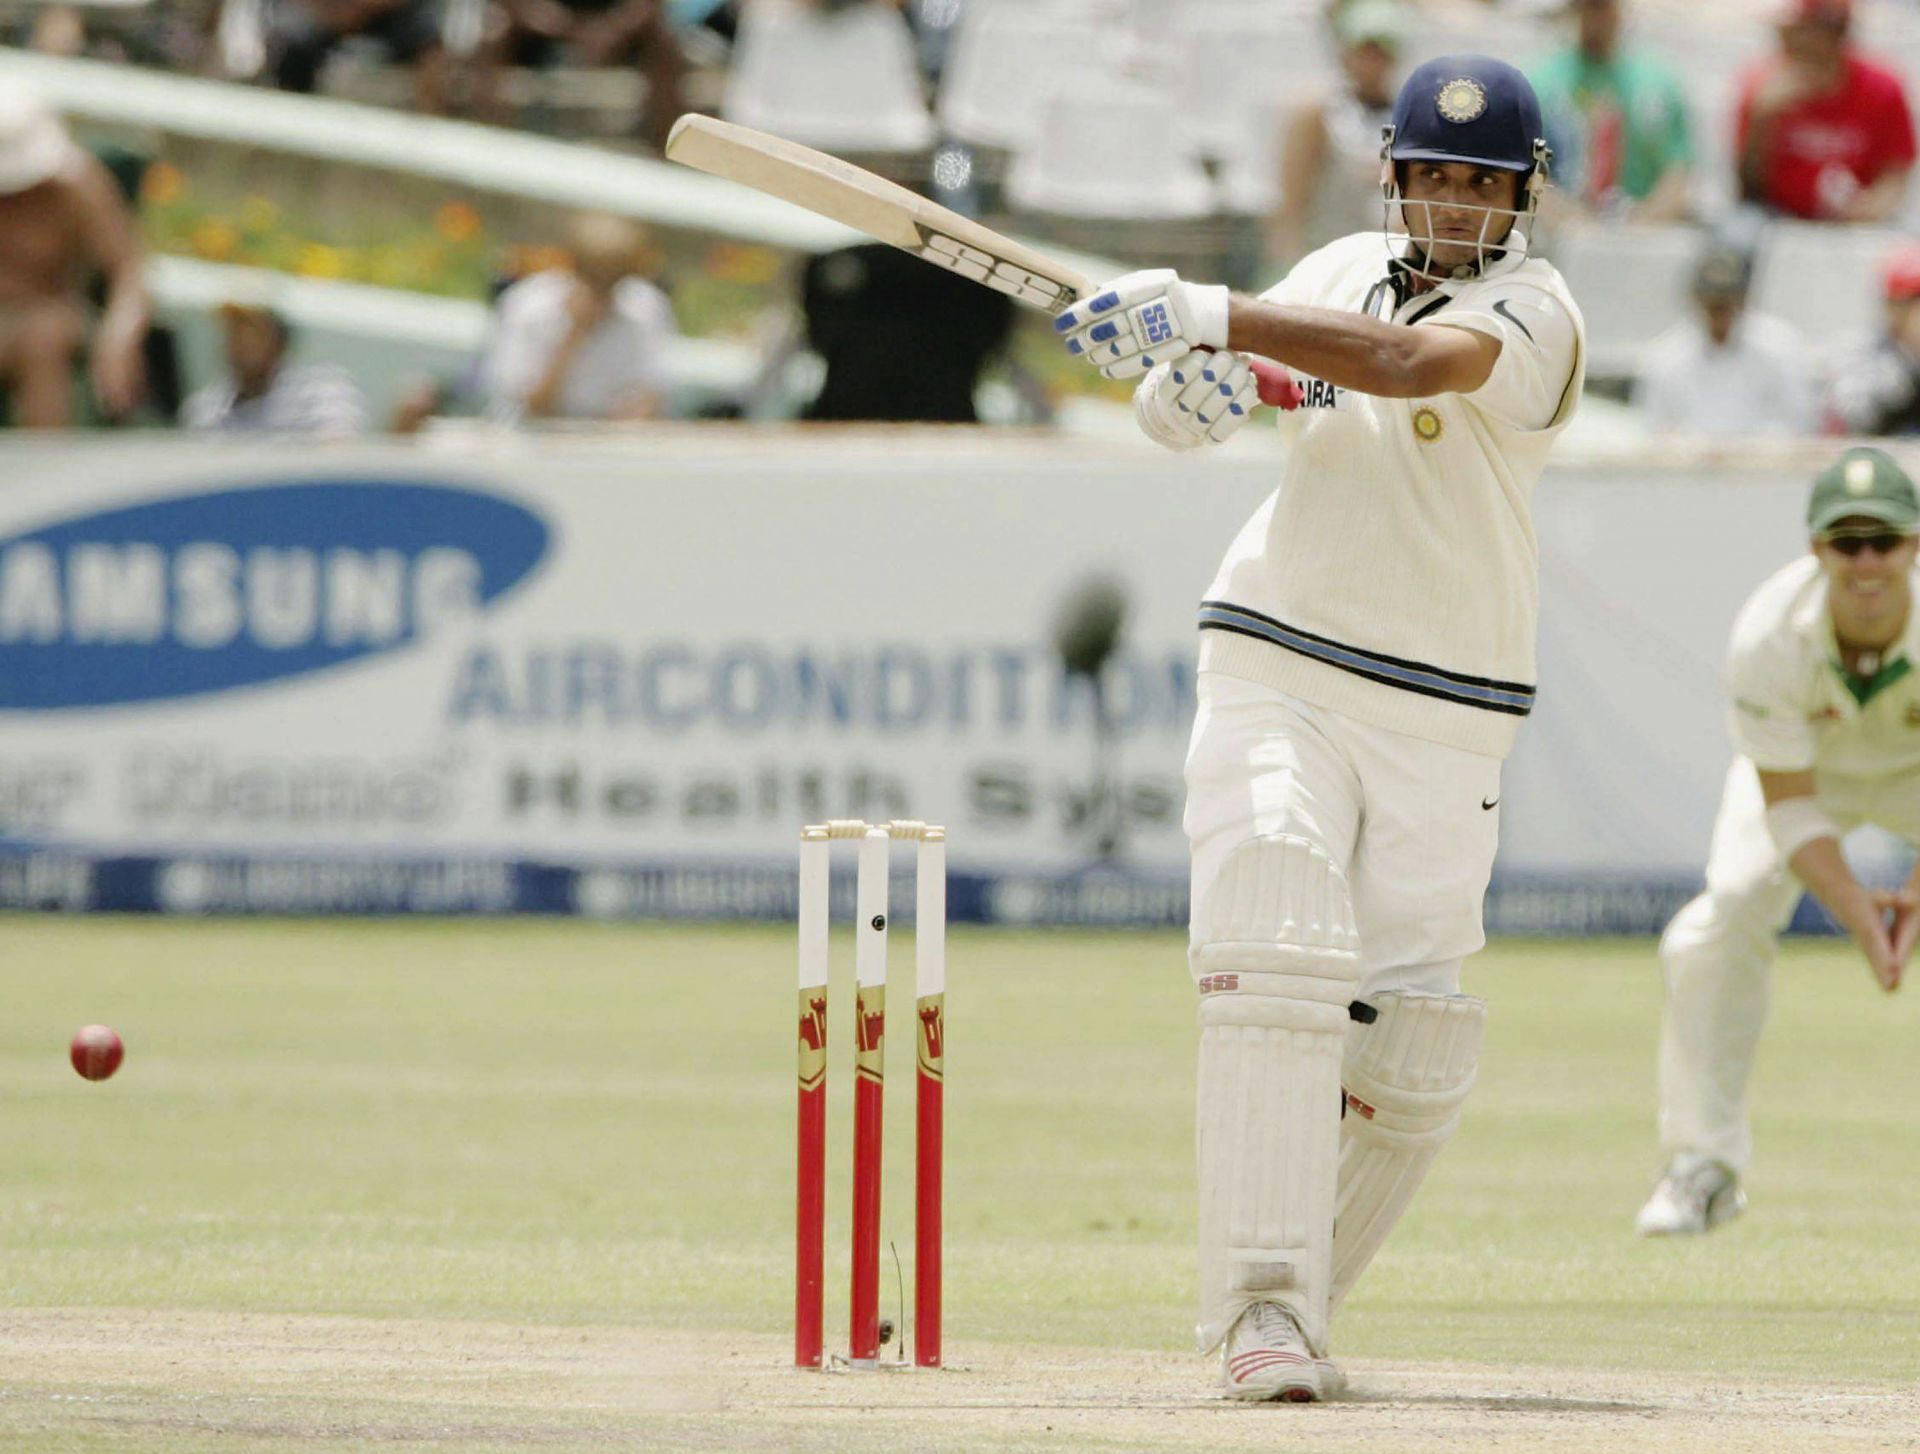 Ganguly made an incredible comeback in Test cricket in 2006